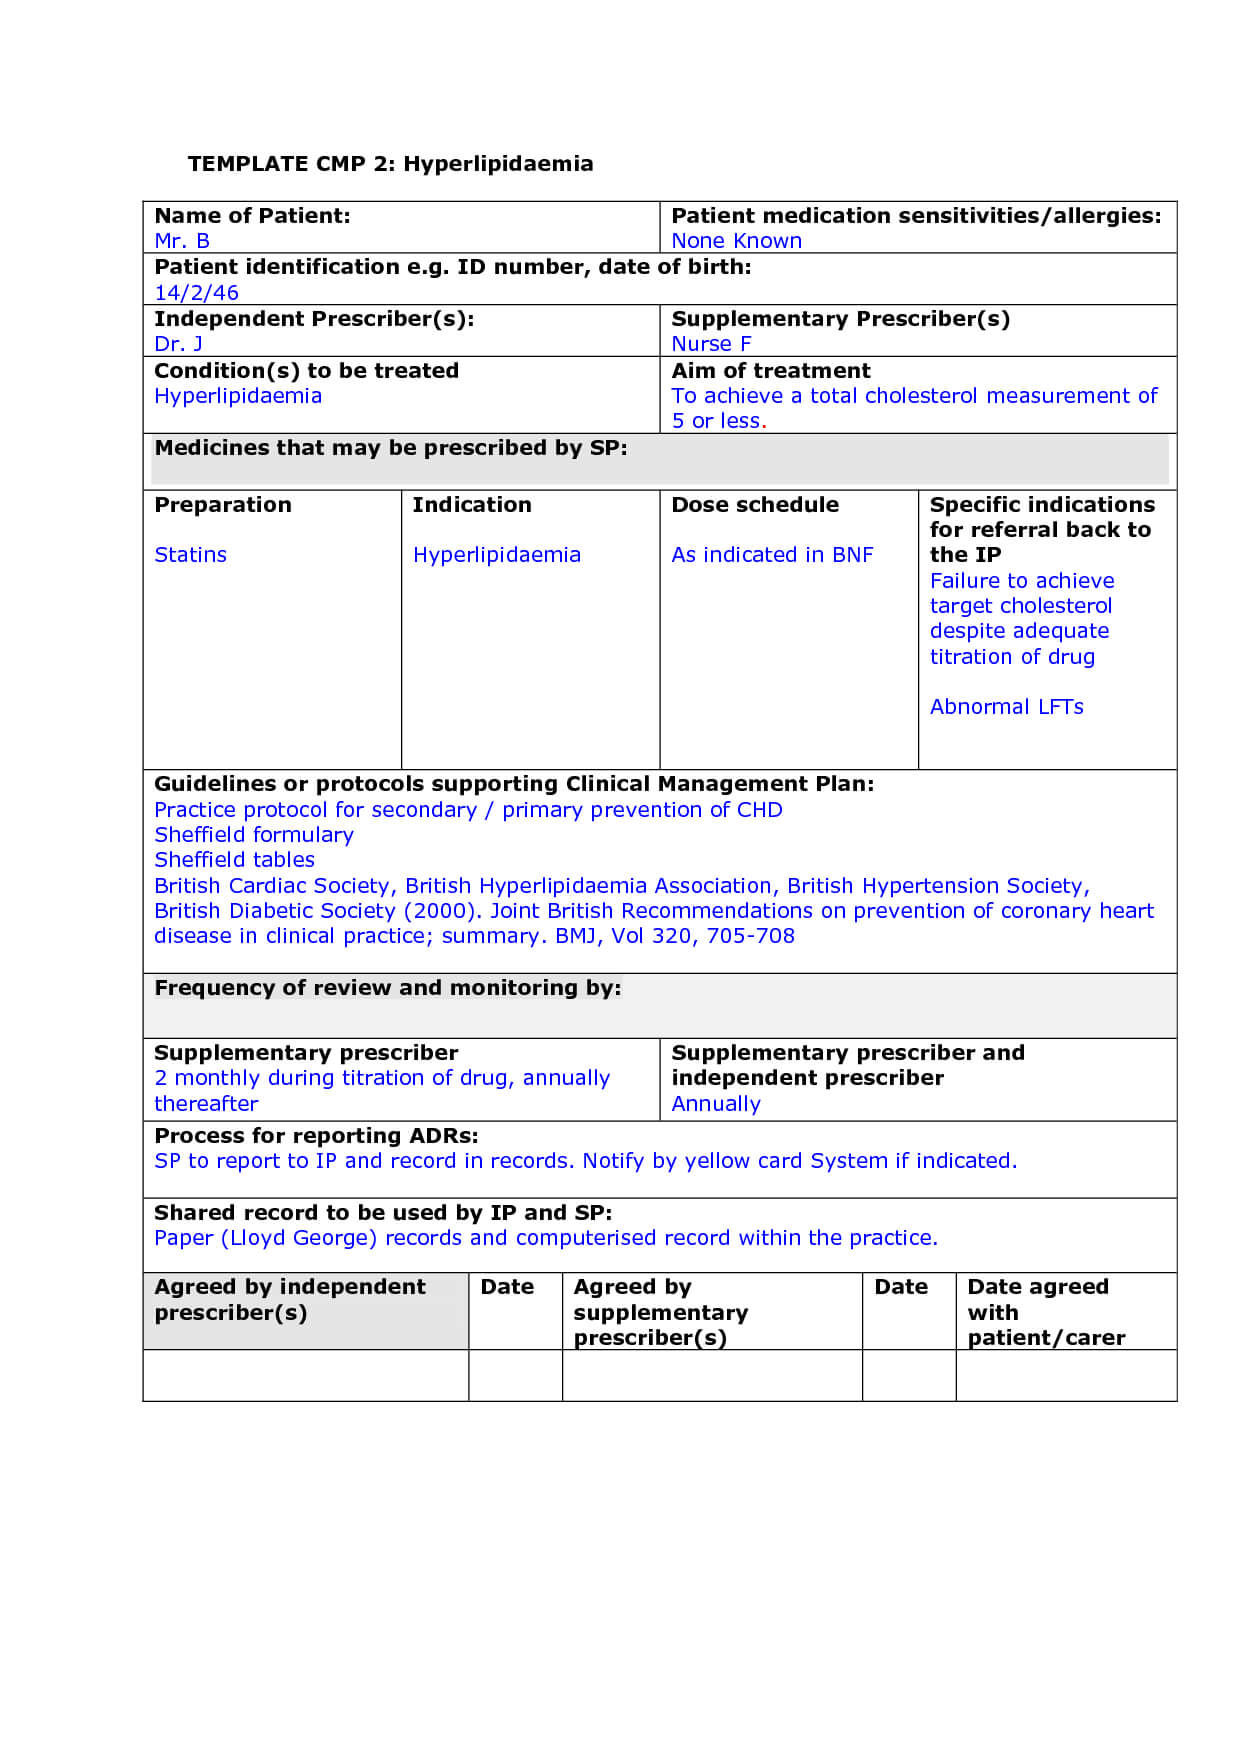 004 Nursing Drug Card Template Staggering Ideas School In Pharmacology Drug Card Template